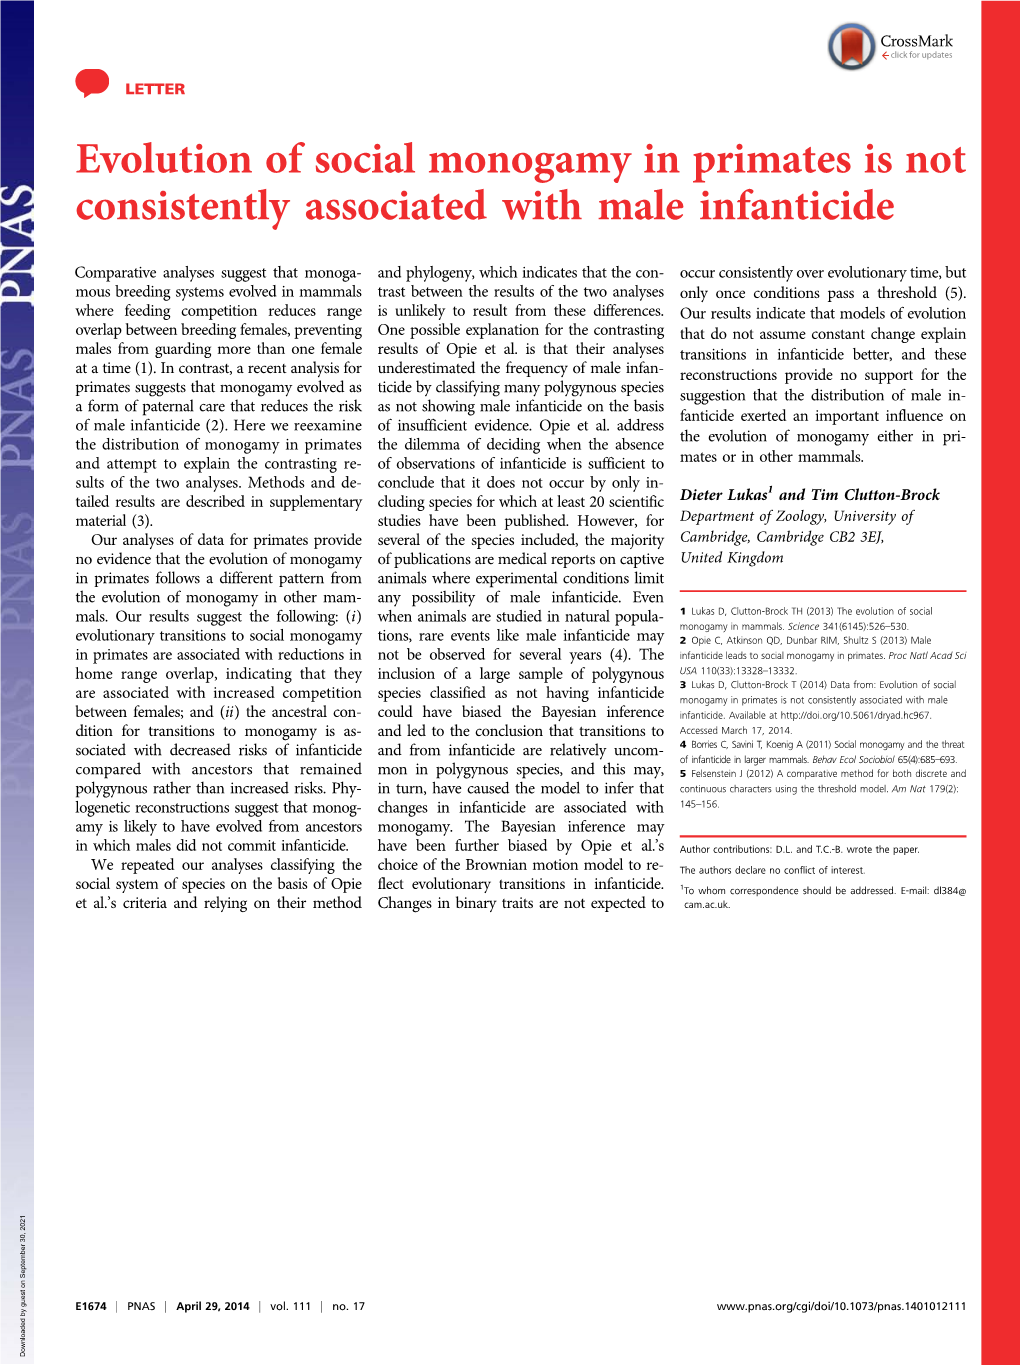 Evolution of Social Monogamy in Primates Is Not Consistently Associated with Male Infanticide